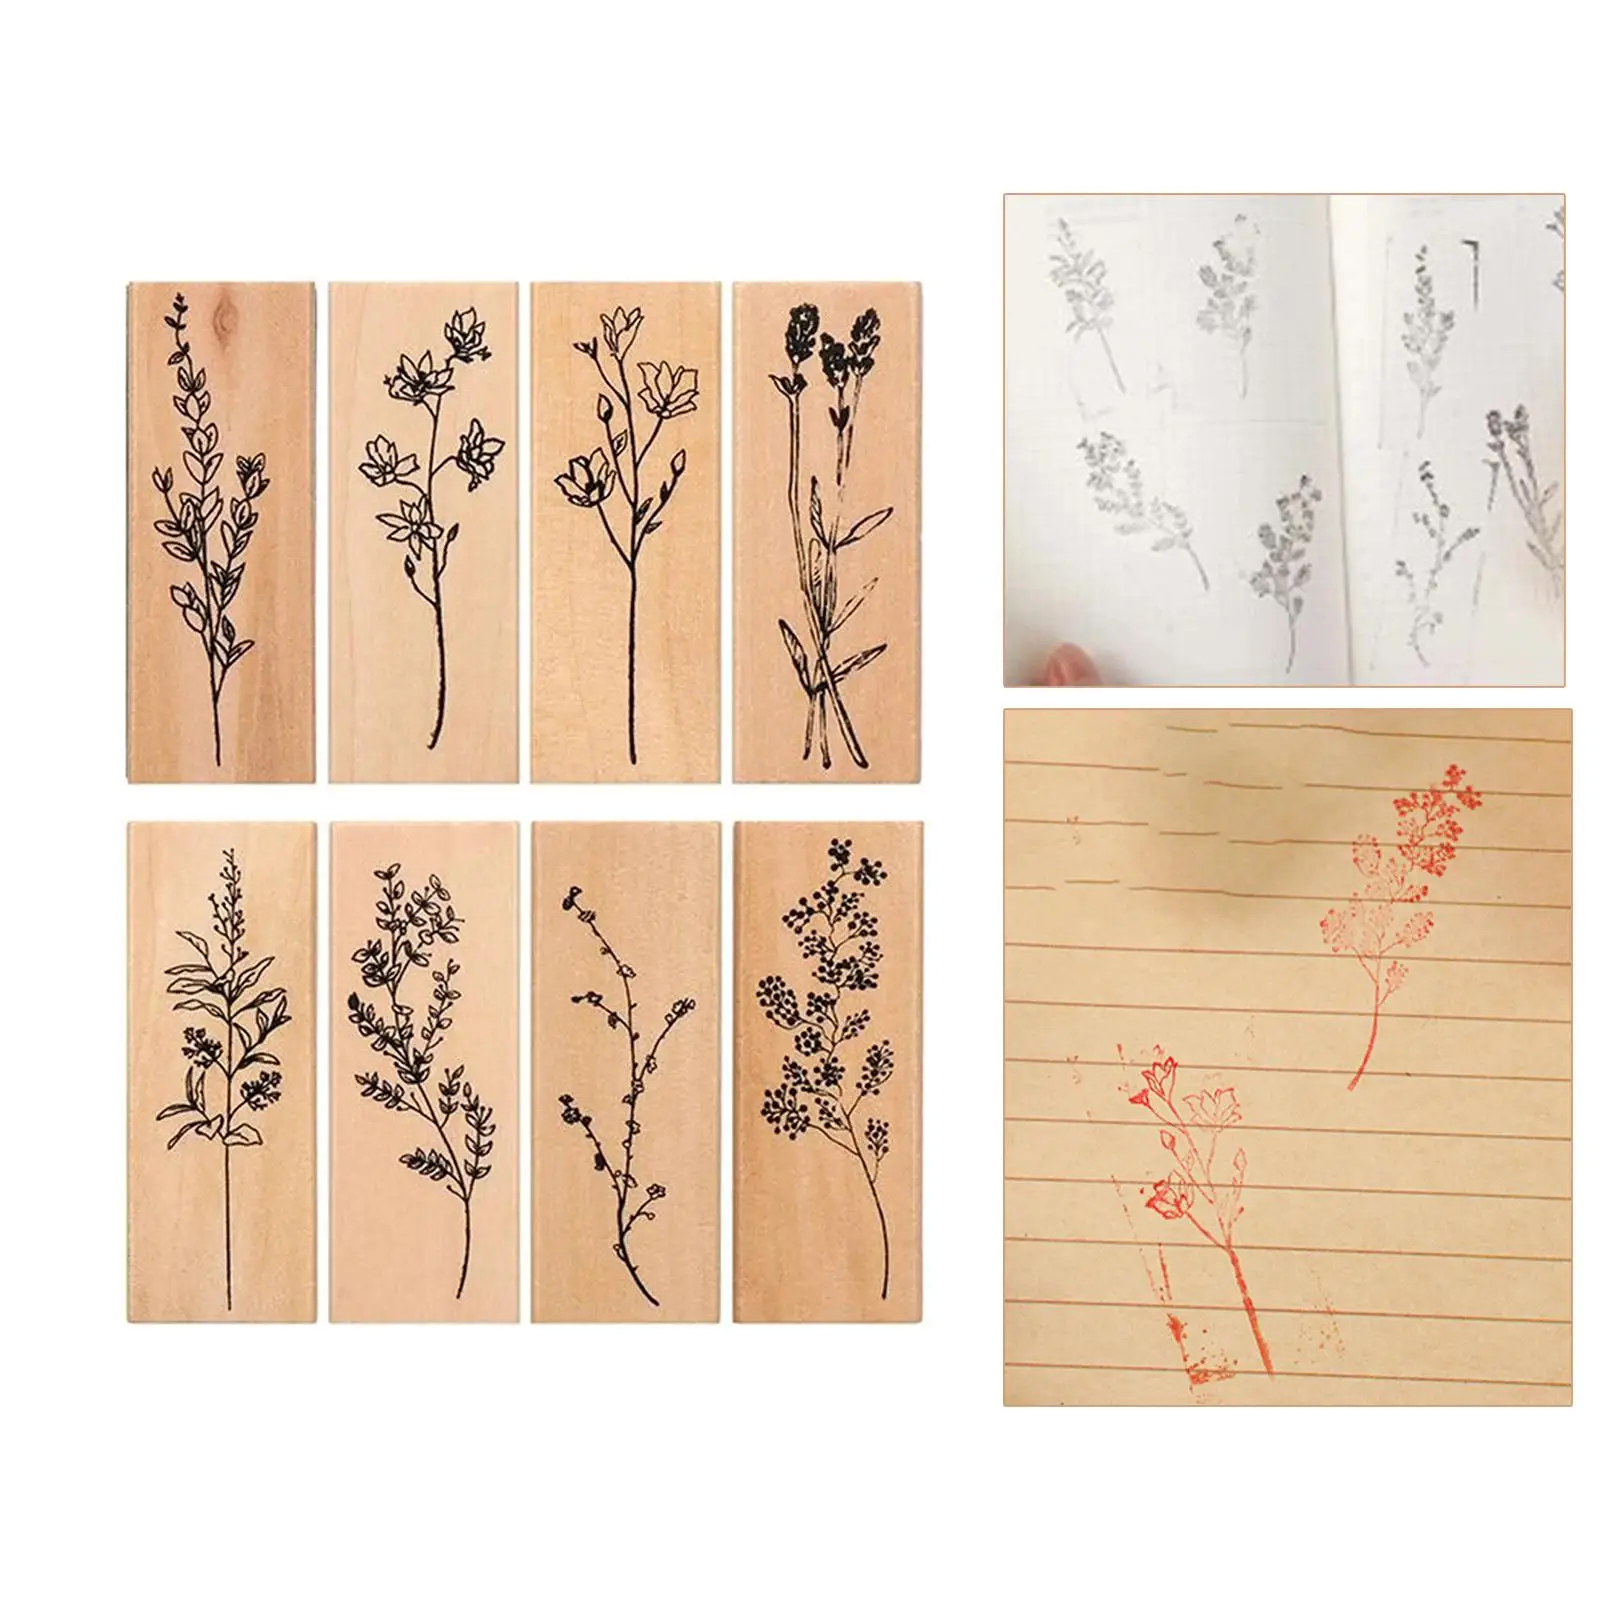 8Pcs Wooden Mounted Stamps Scrapbook DIY Crafts Stationery Wood Rubber Stamp Set for Teaching Kids Photo Album Journals Crafting